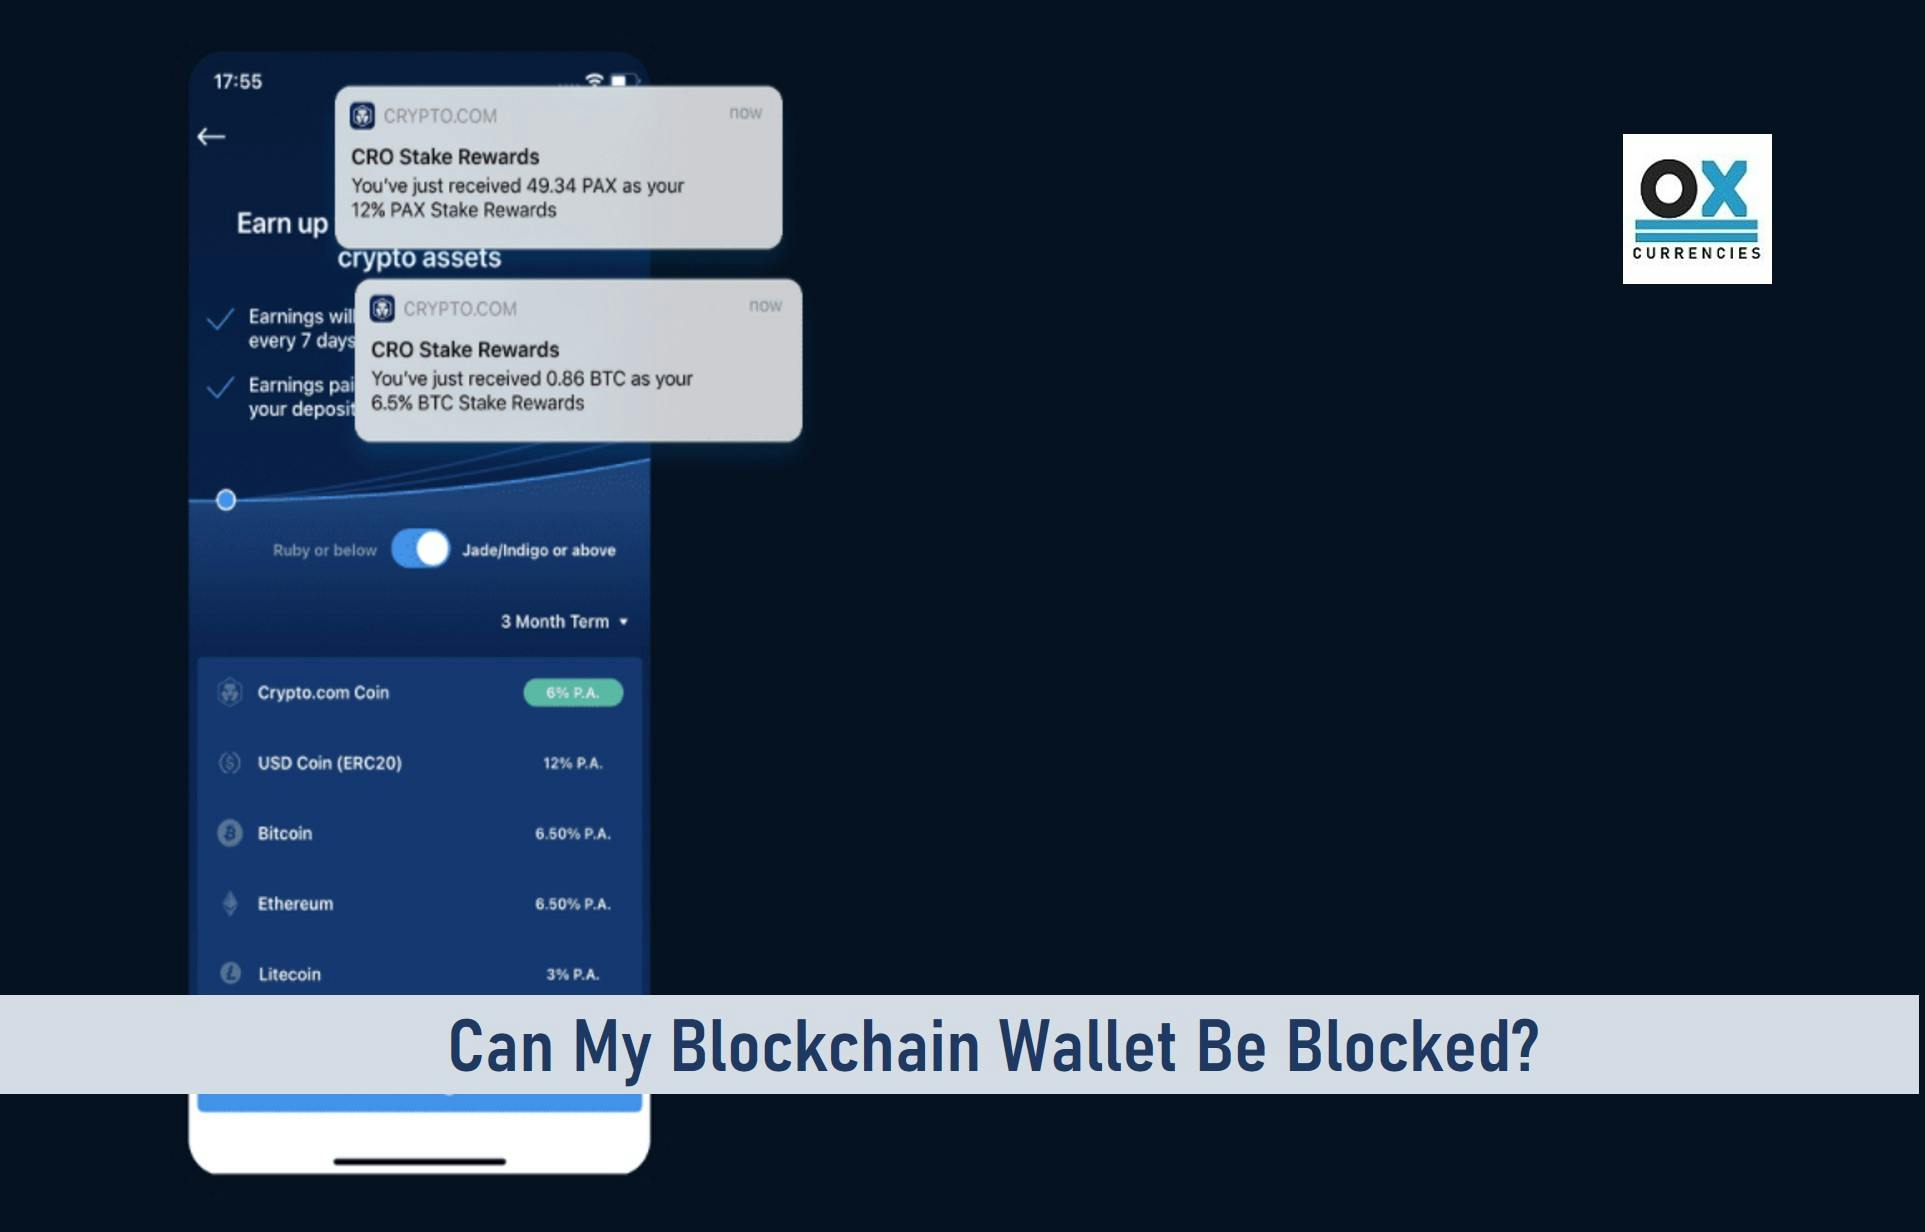 Can My Blockchain Wallet Be Blocked?